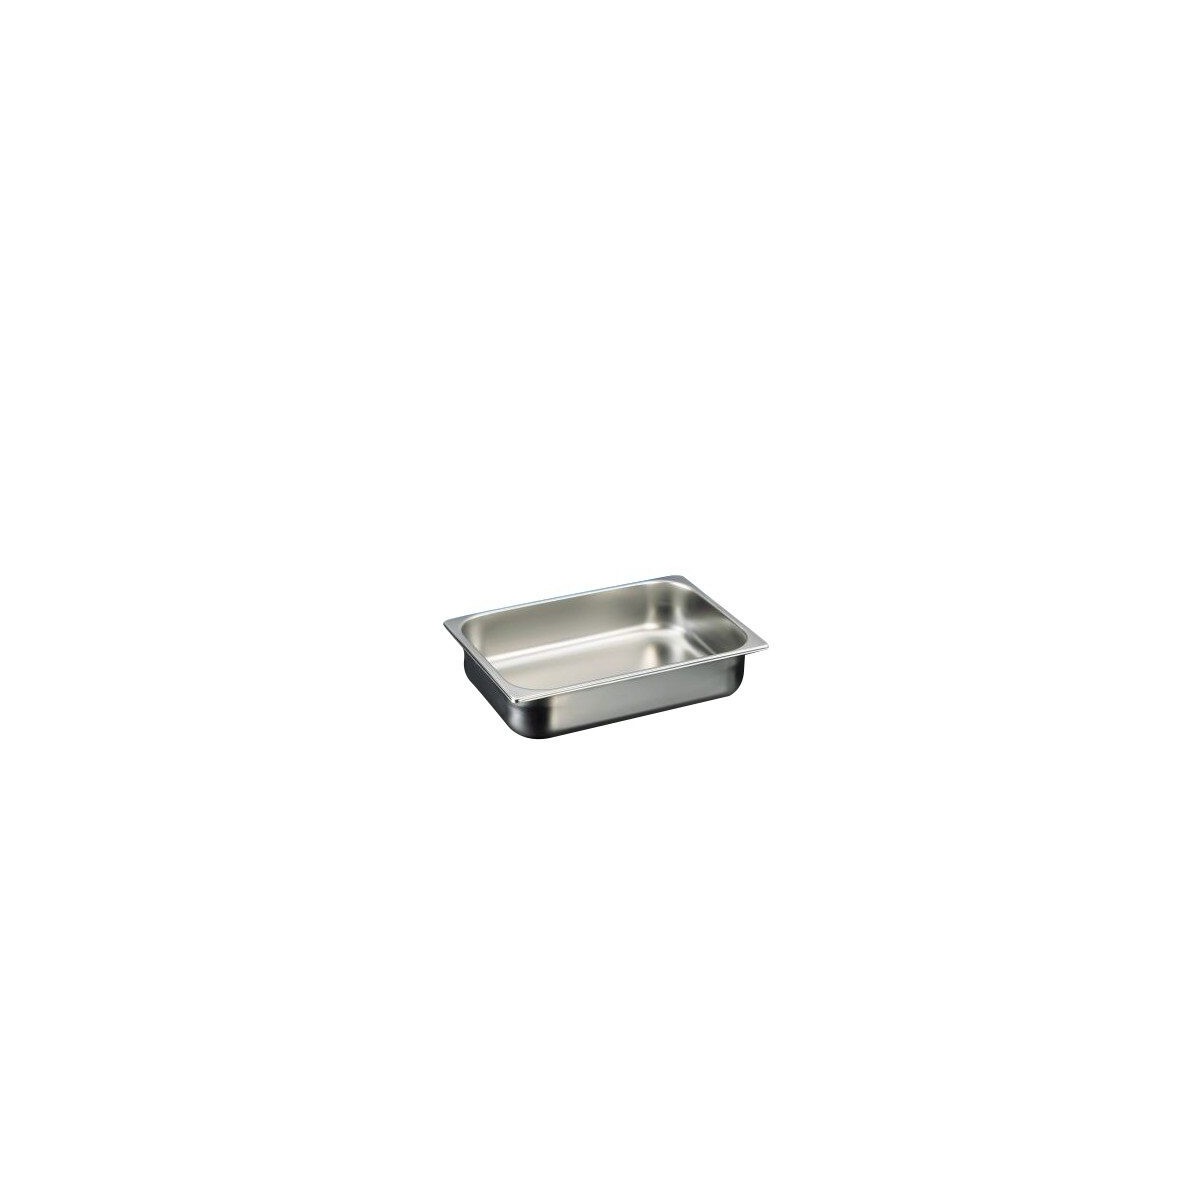 STAINLESS STEEL ICE TRAY 6.5L 360 X 250 X 80 MM